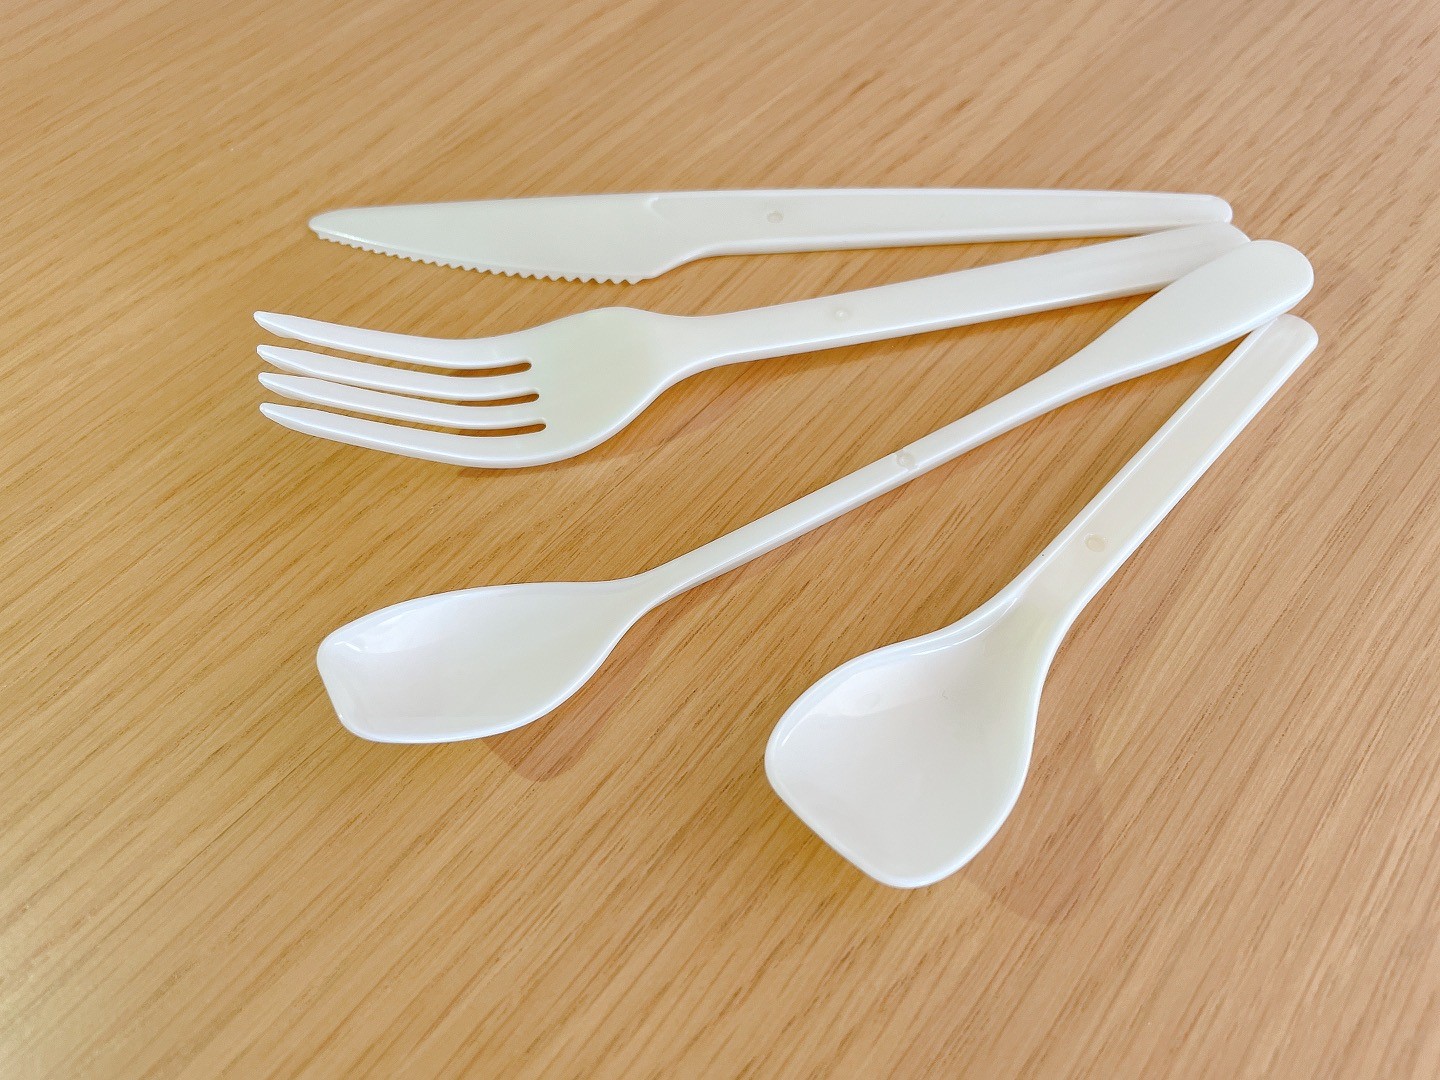 forks, knives, muddler spoons, and yogurt spoons made from KANEKA Biodegradable Polymer Green Planet™